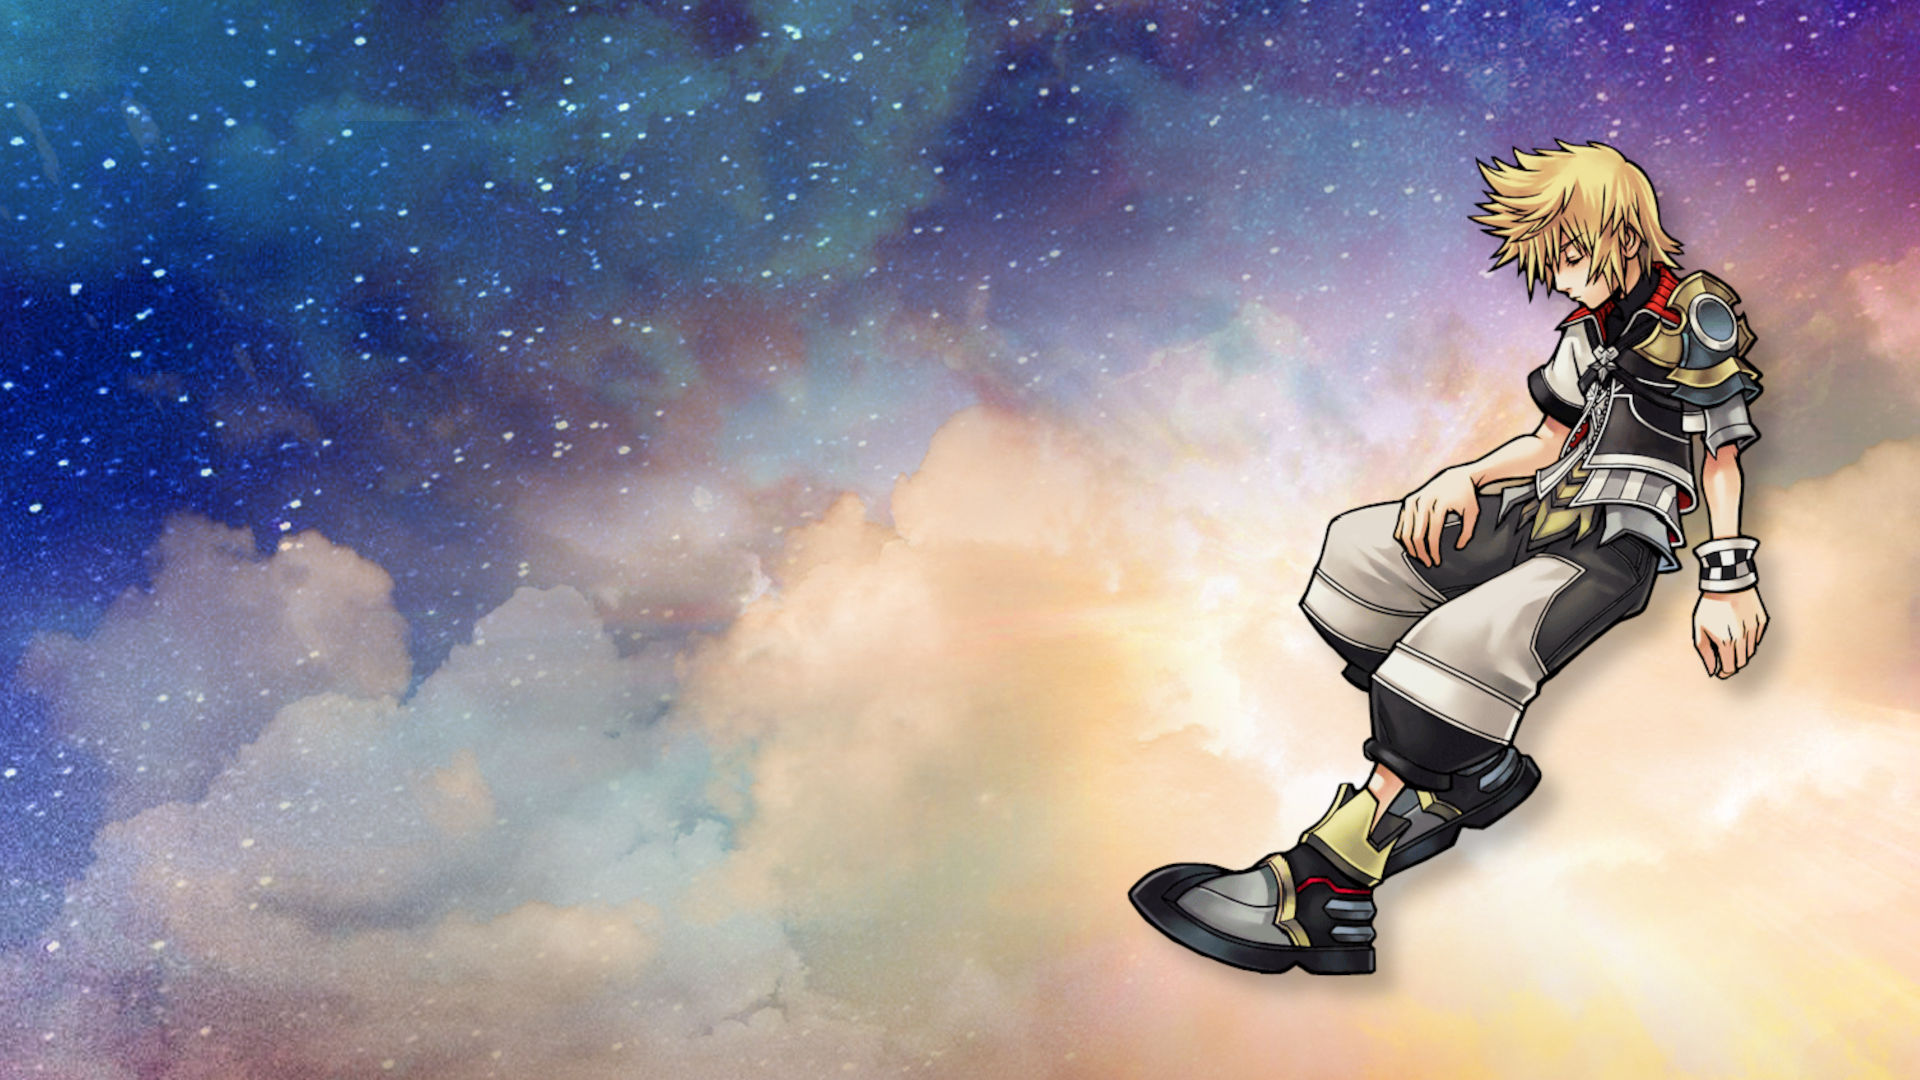 60 Kingdom Hearts HD Wallpapers and Backgrounds